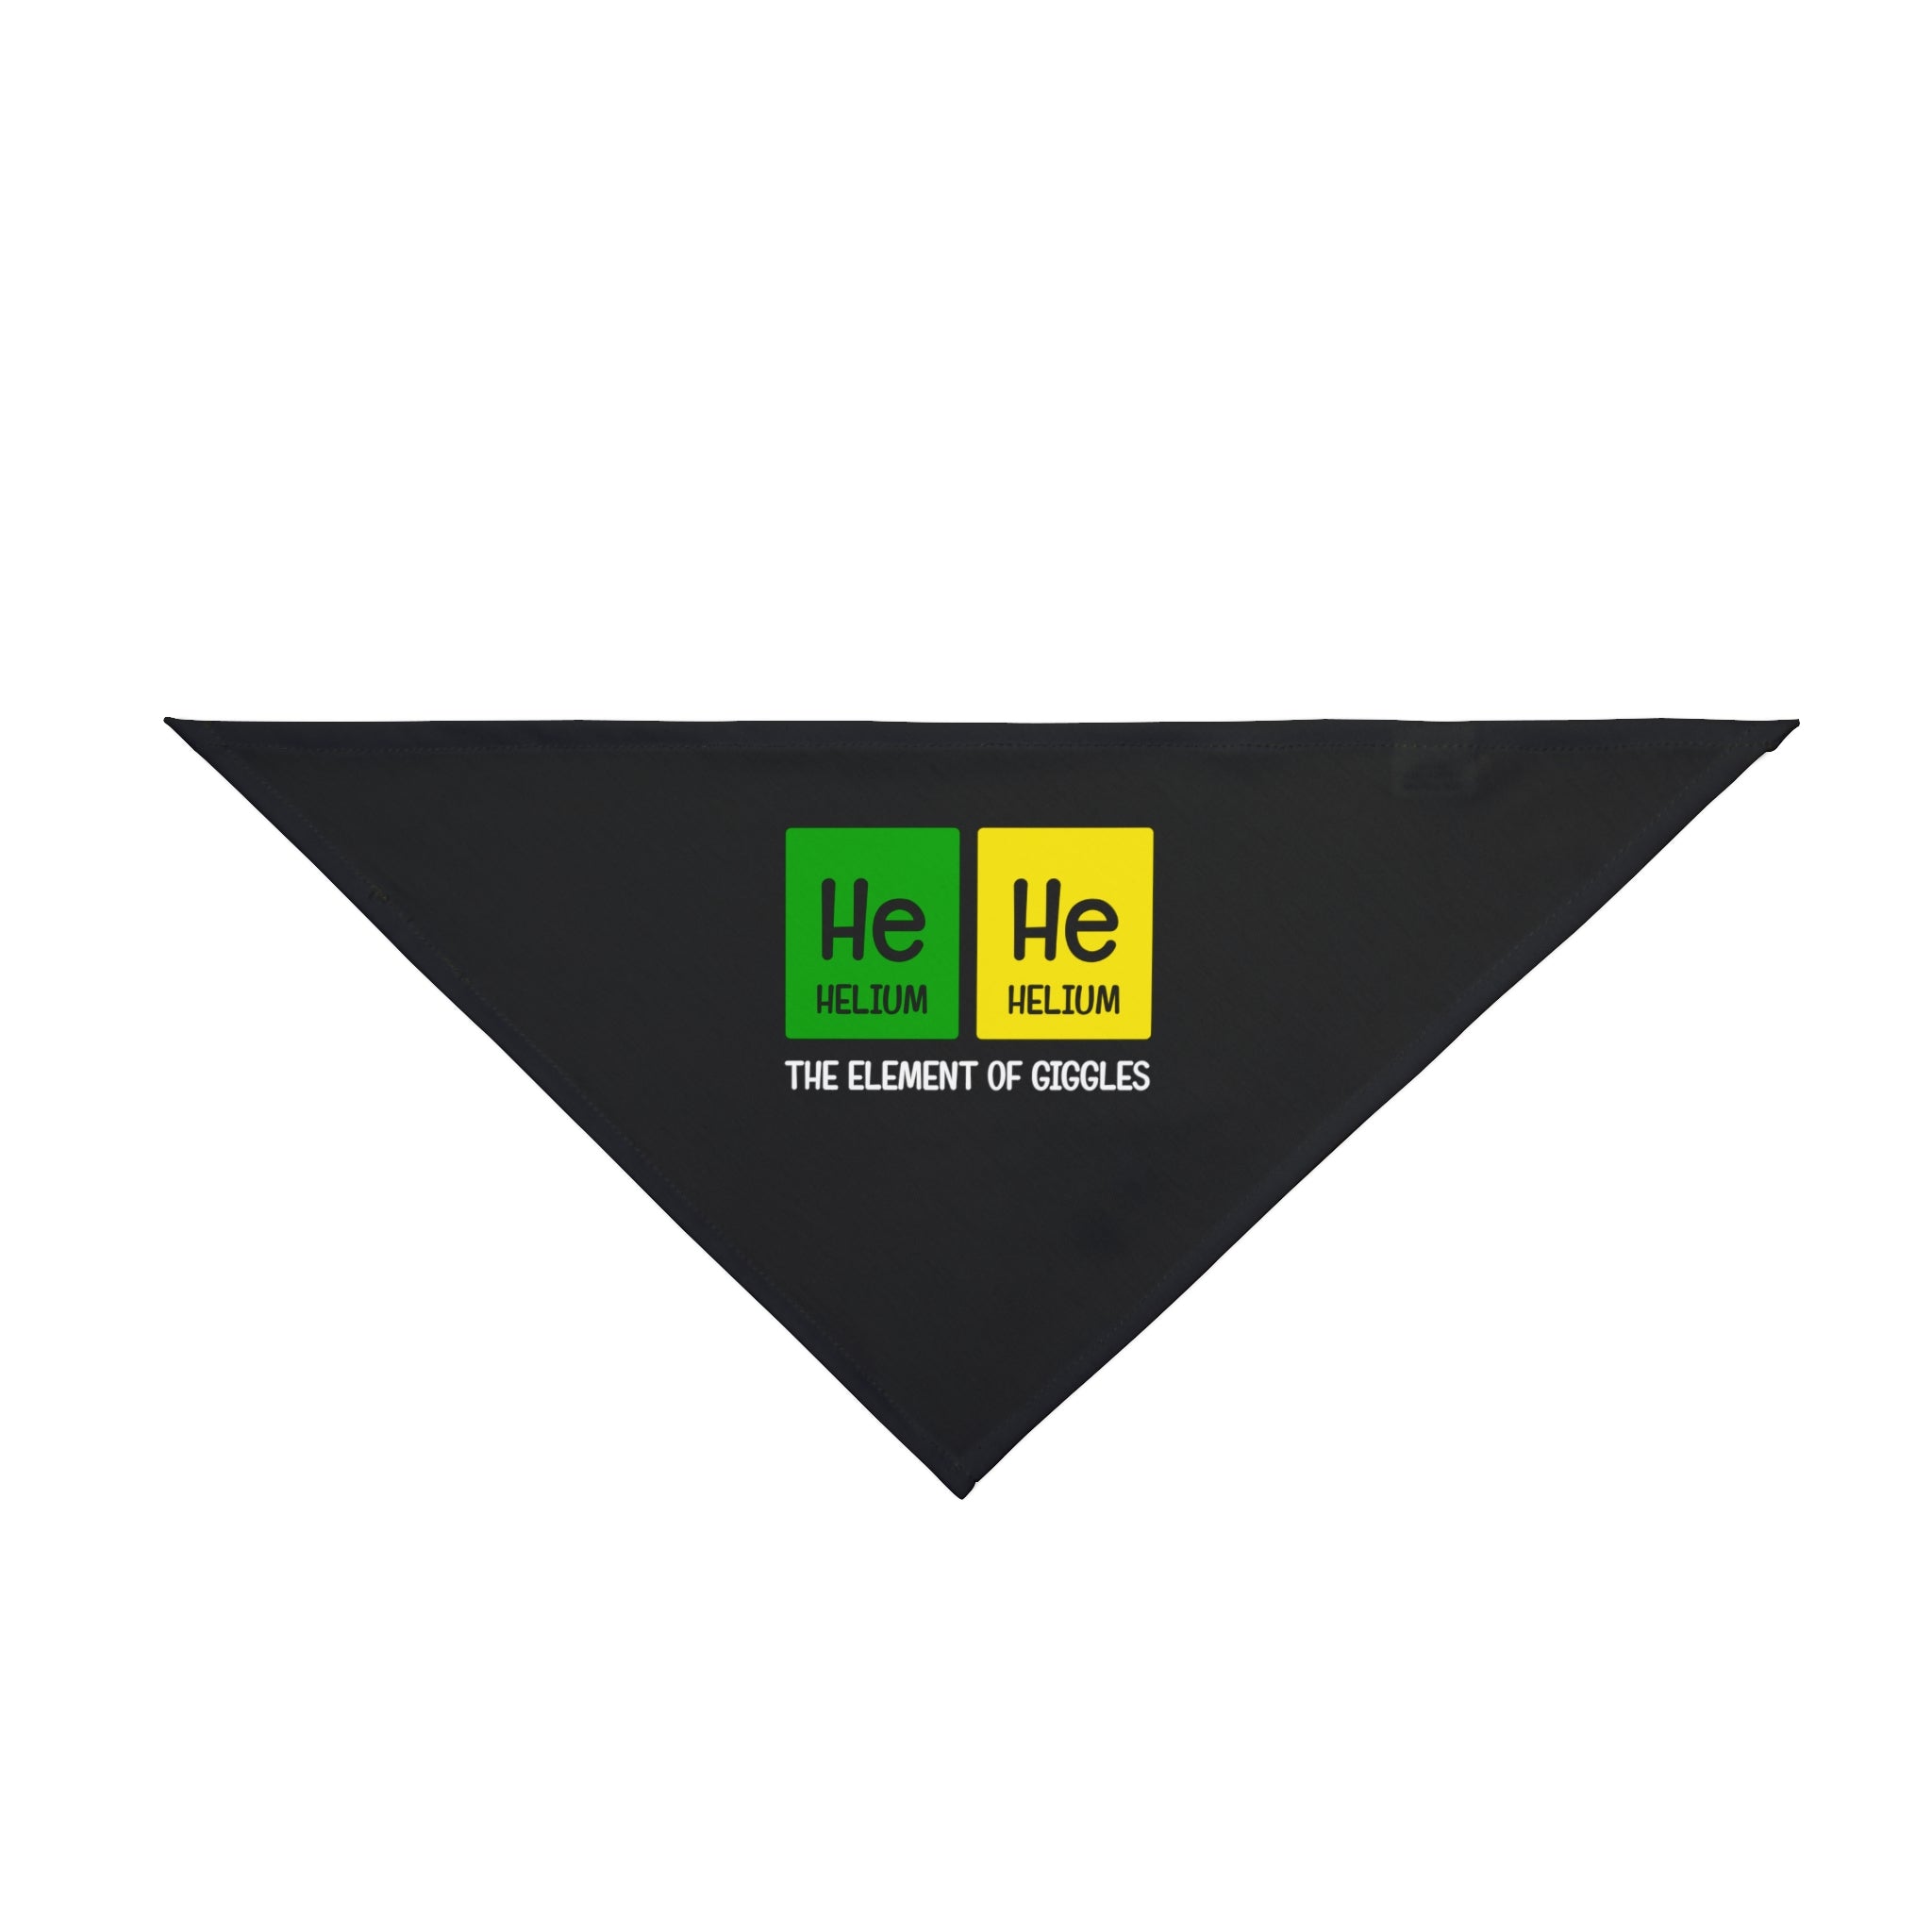 A He-He - Pet Bandana with a comfy fit, featuring an image of helium elements from the periodic table labeled "He" and the text "Helium: The Element of Giggles" in green and yellow, crafted from soft-spun polyester for added comfort.